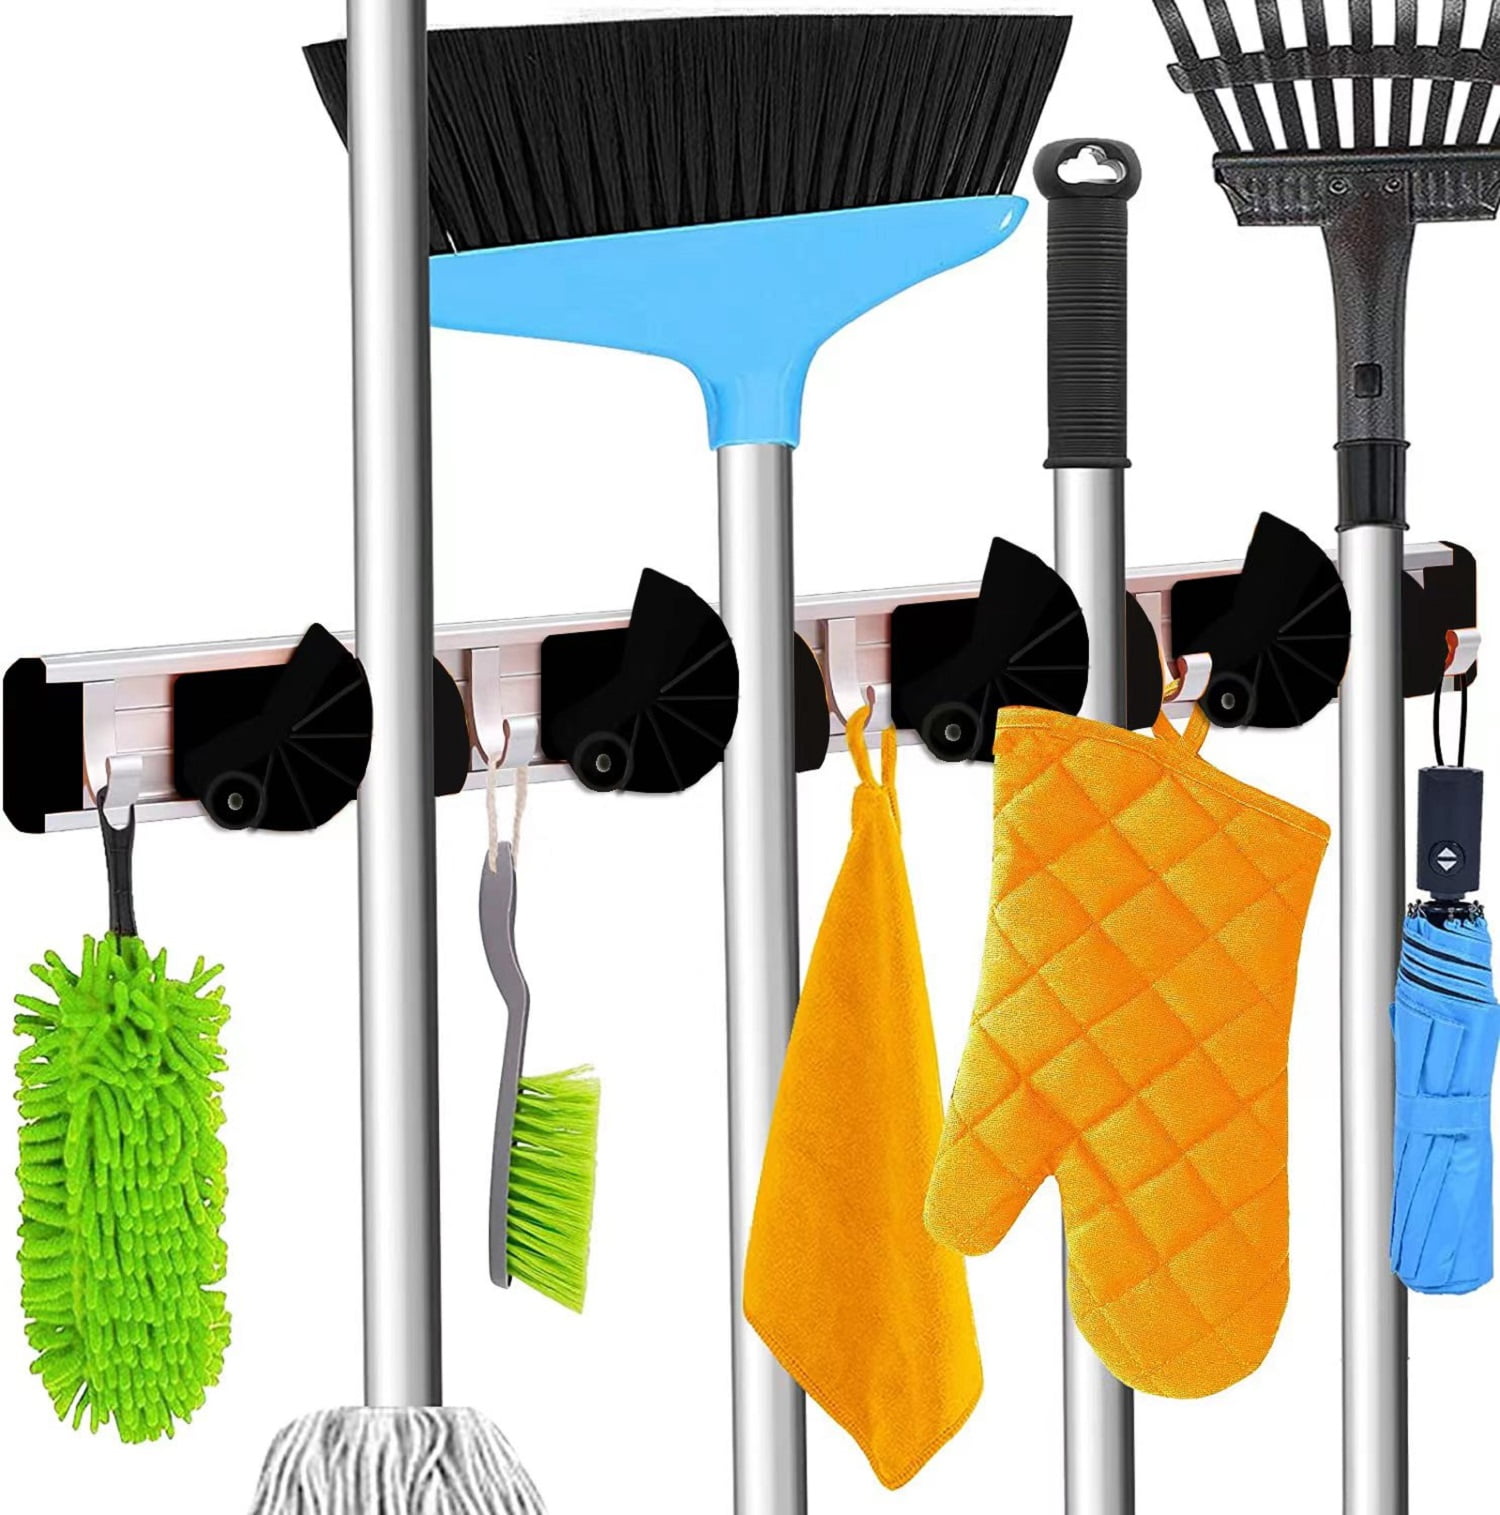 4 Pack Stainless Steel HYRIXDIRECT Mop and Broom Holder Wall Mount Heavy Duty Stainless Steel Broom Holder Wall Mounted Broom Organizer Home Garden Garage Storage Rack 